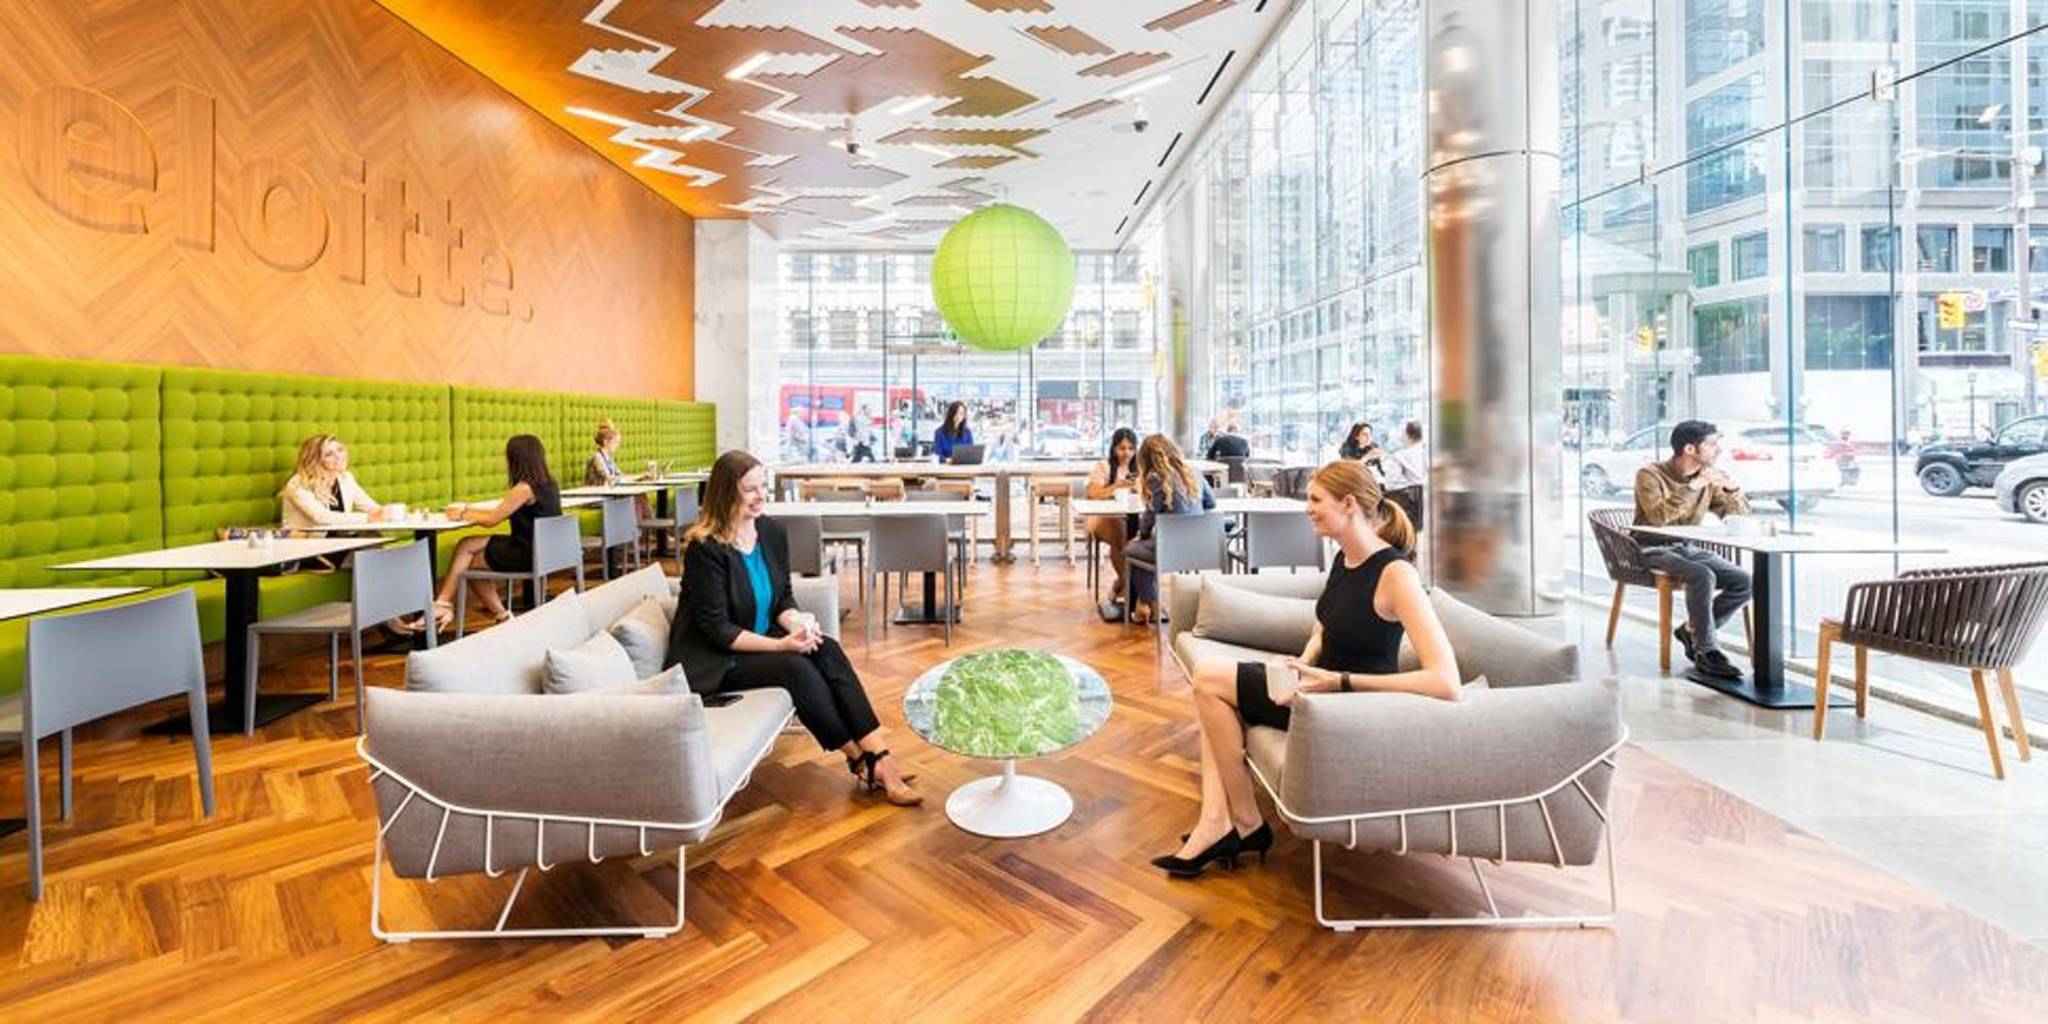 This image is a photograph of the inside of the Deloitte building in a cafe style room and includes people sitting down some of whom are socializing.